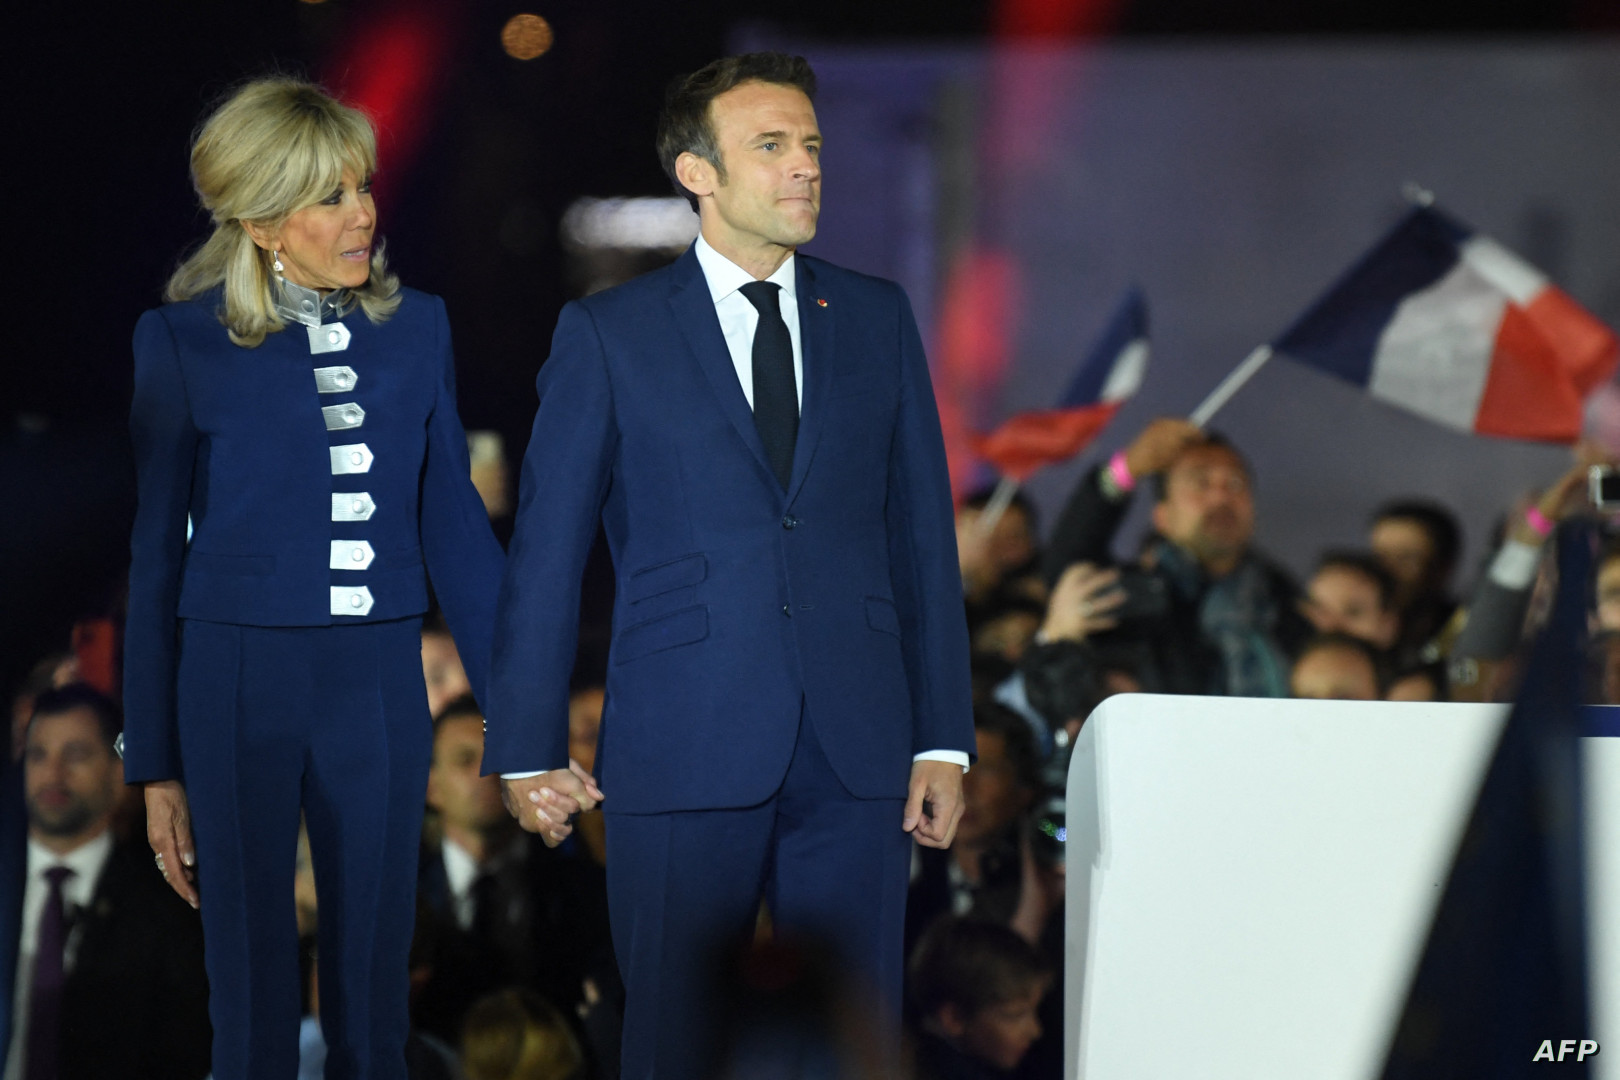 Macron pledges to be a "president for all" after beating Le Pen